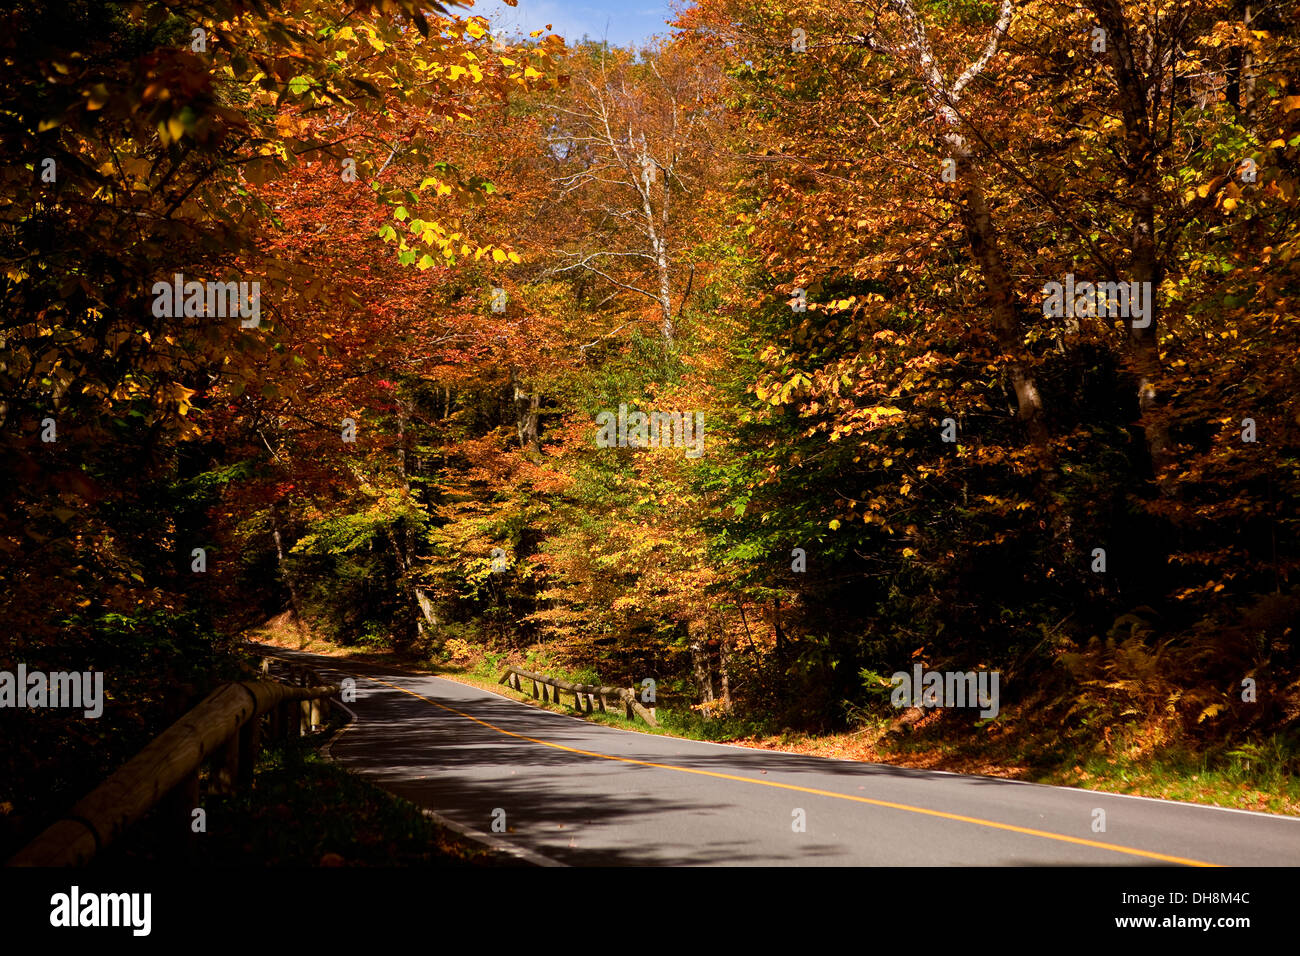 A winding road leading to Mount Greylock summit is surrounded with colorful trees in Berkshire county, Massachusetts Stock Photo